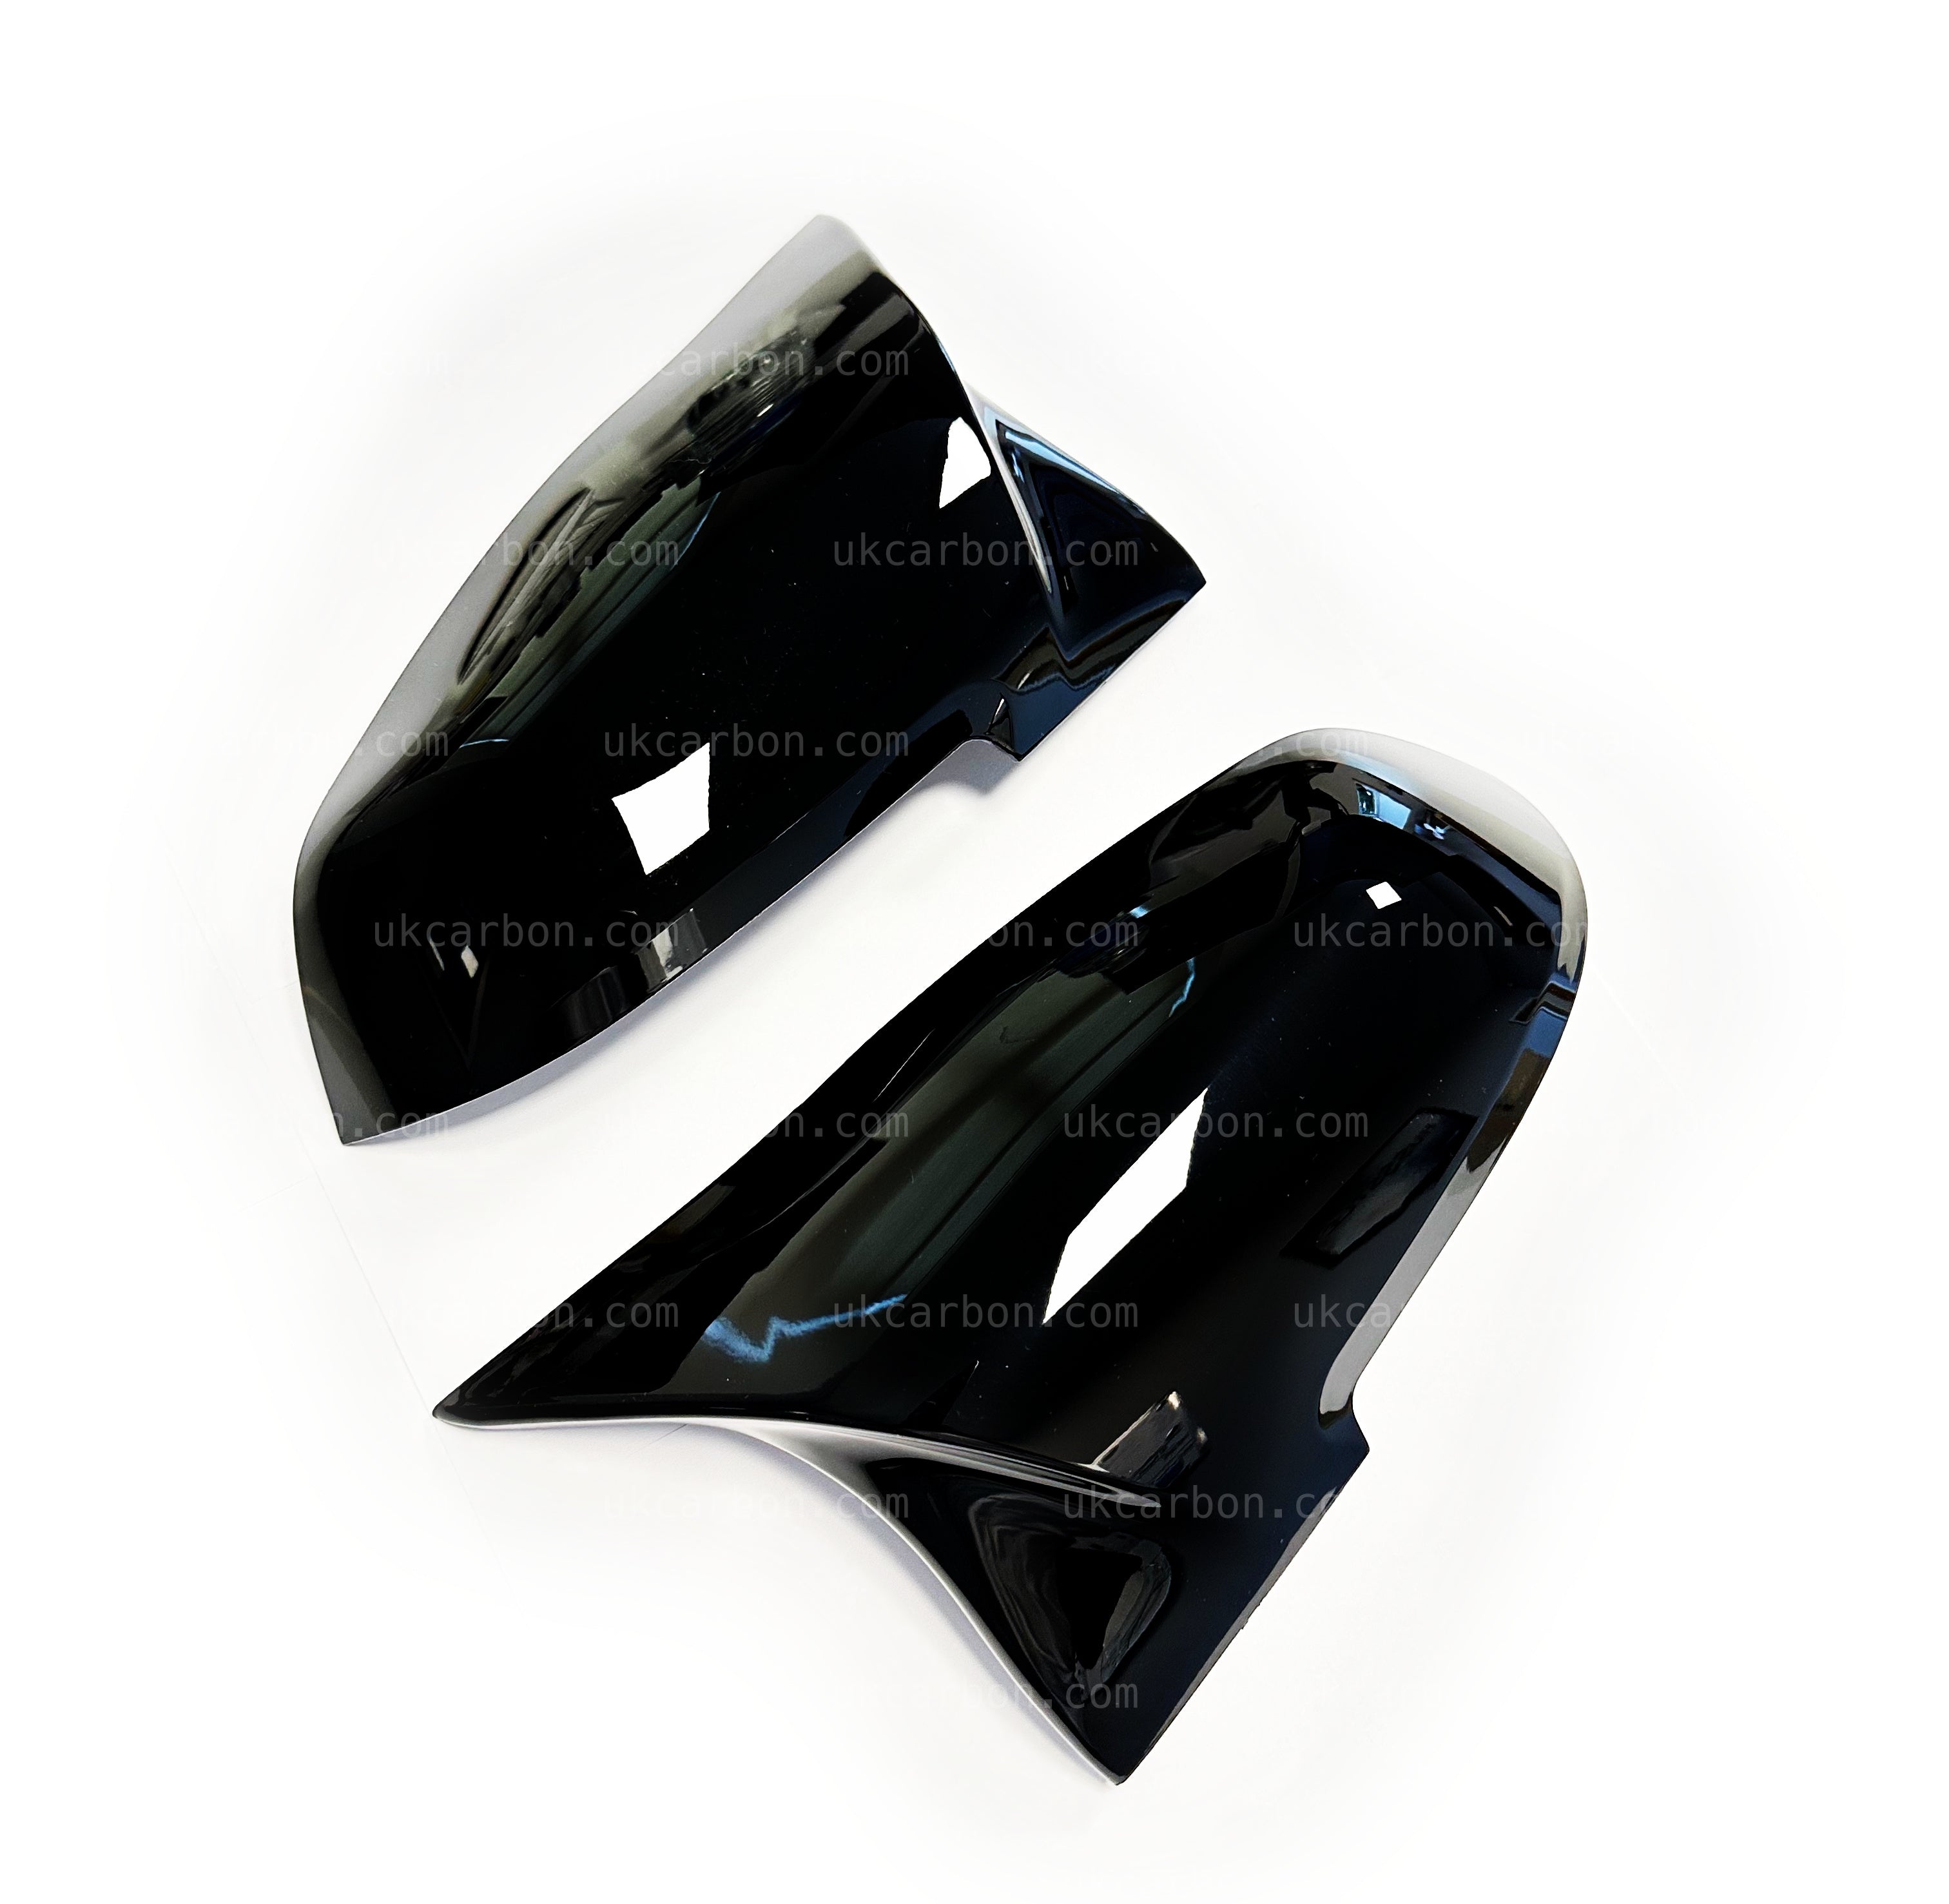 BMW 3 Series Gloss Black M Style Wing Mirror Cover Replacements F30 by UKCarbon